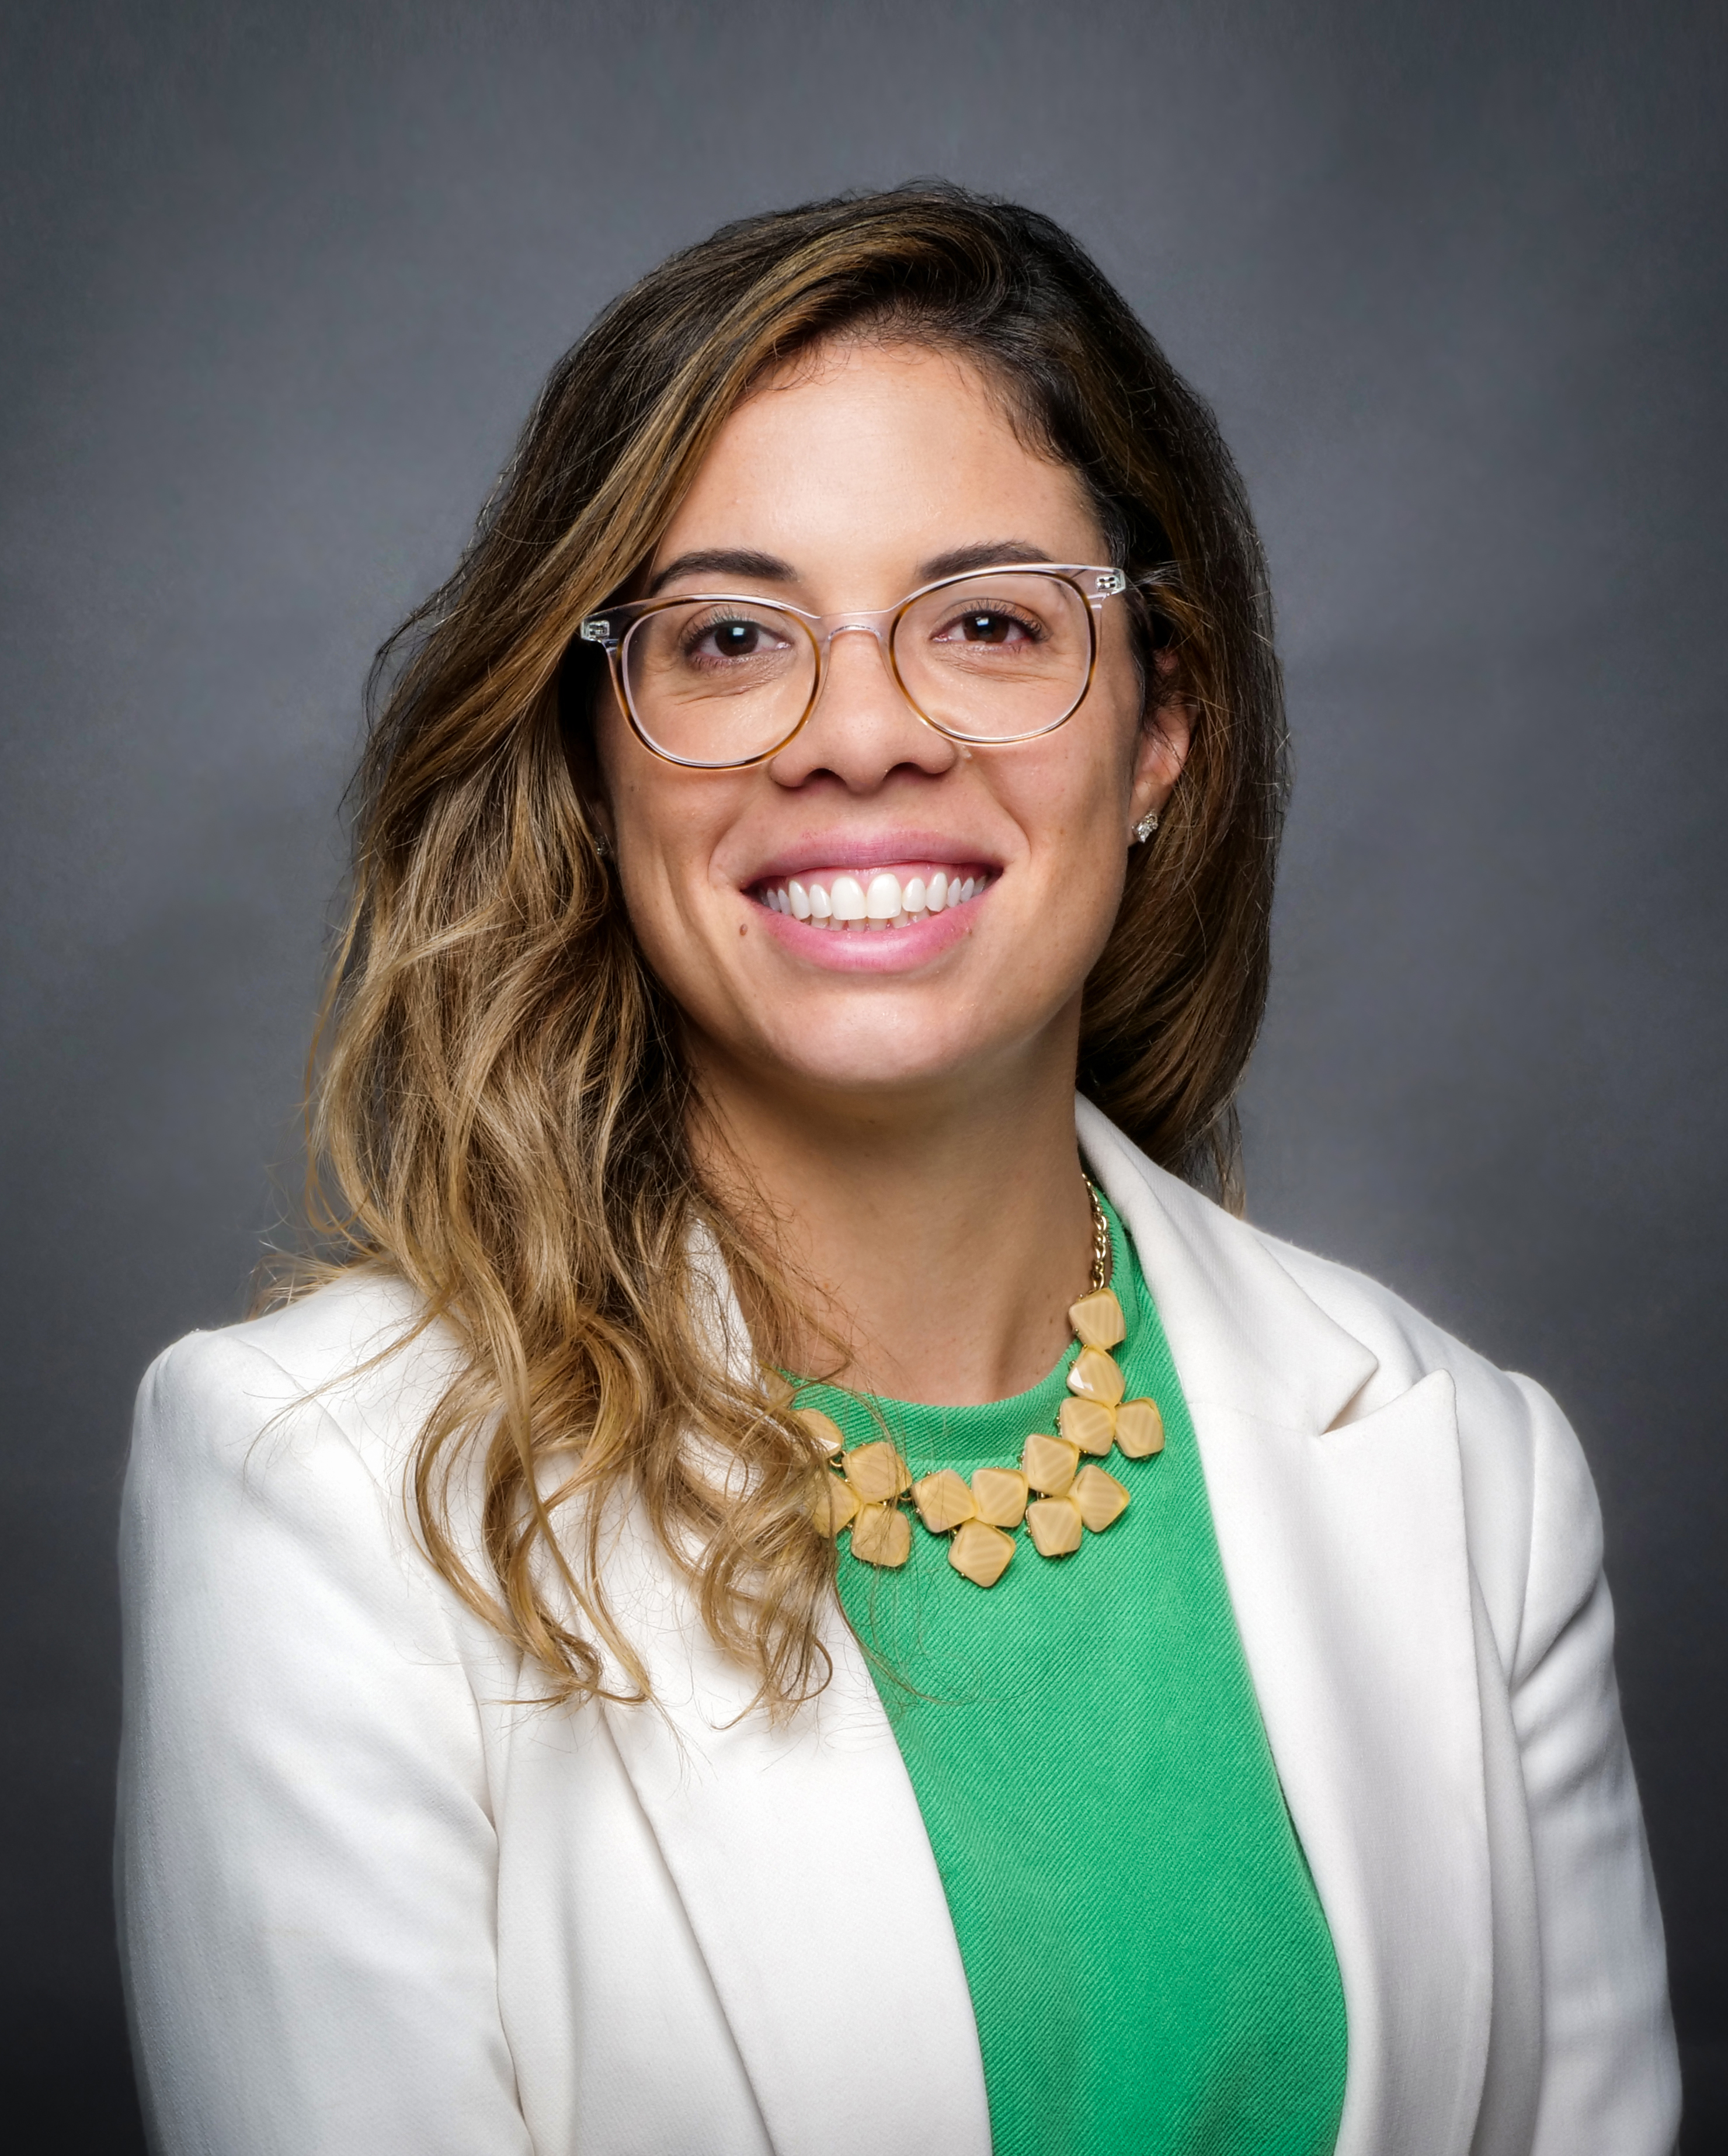 Taynara Formagini, Ph.D., Co-vice Chair of Equity, Diversity and Inclusion